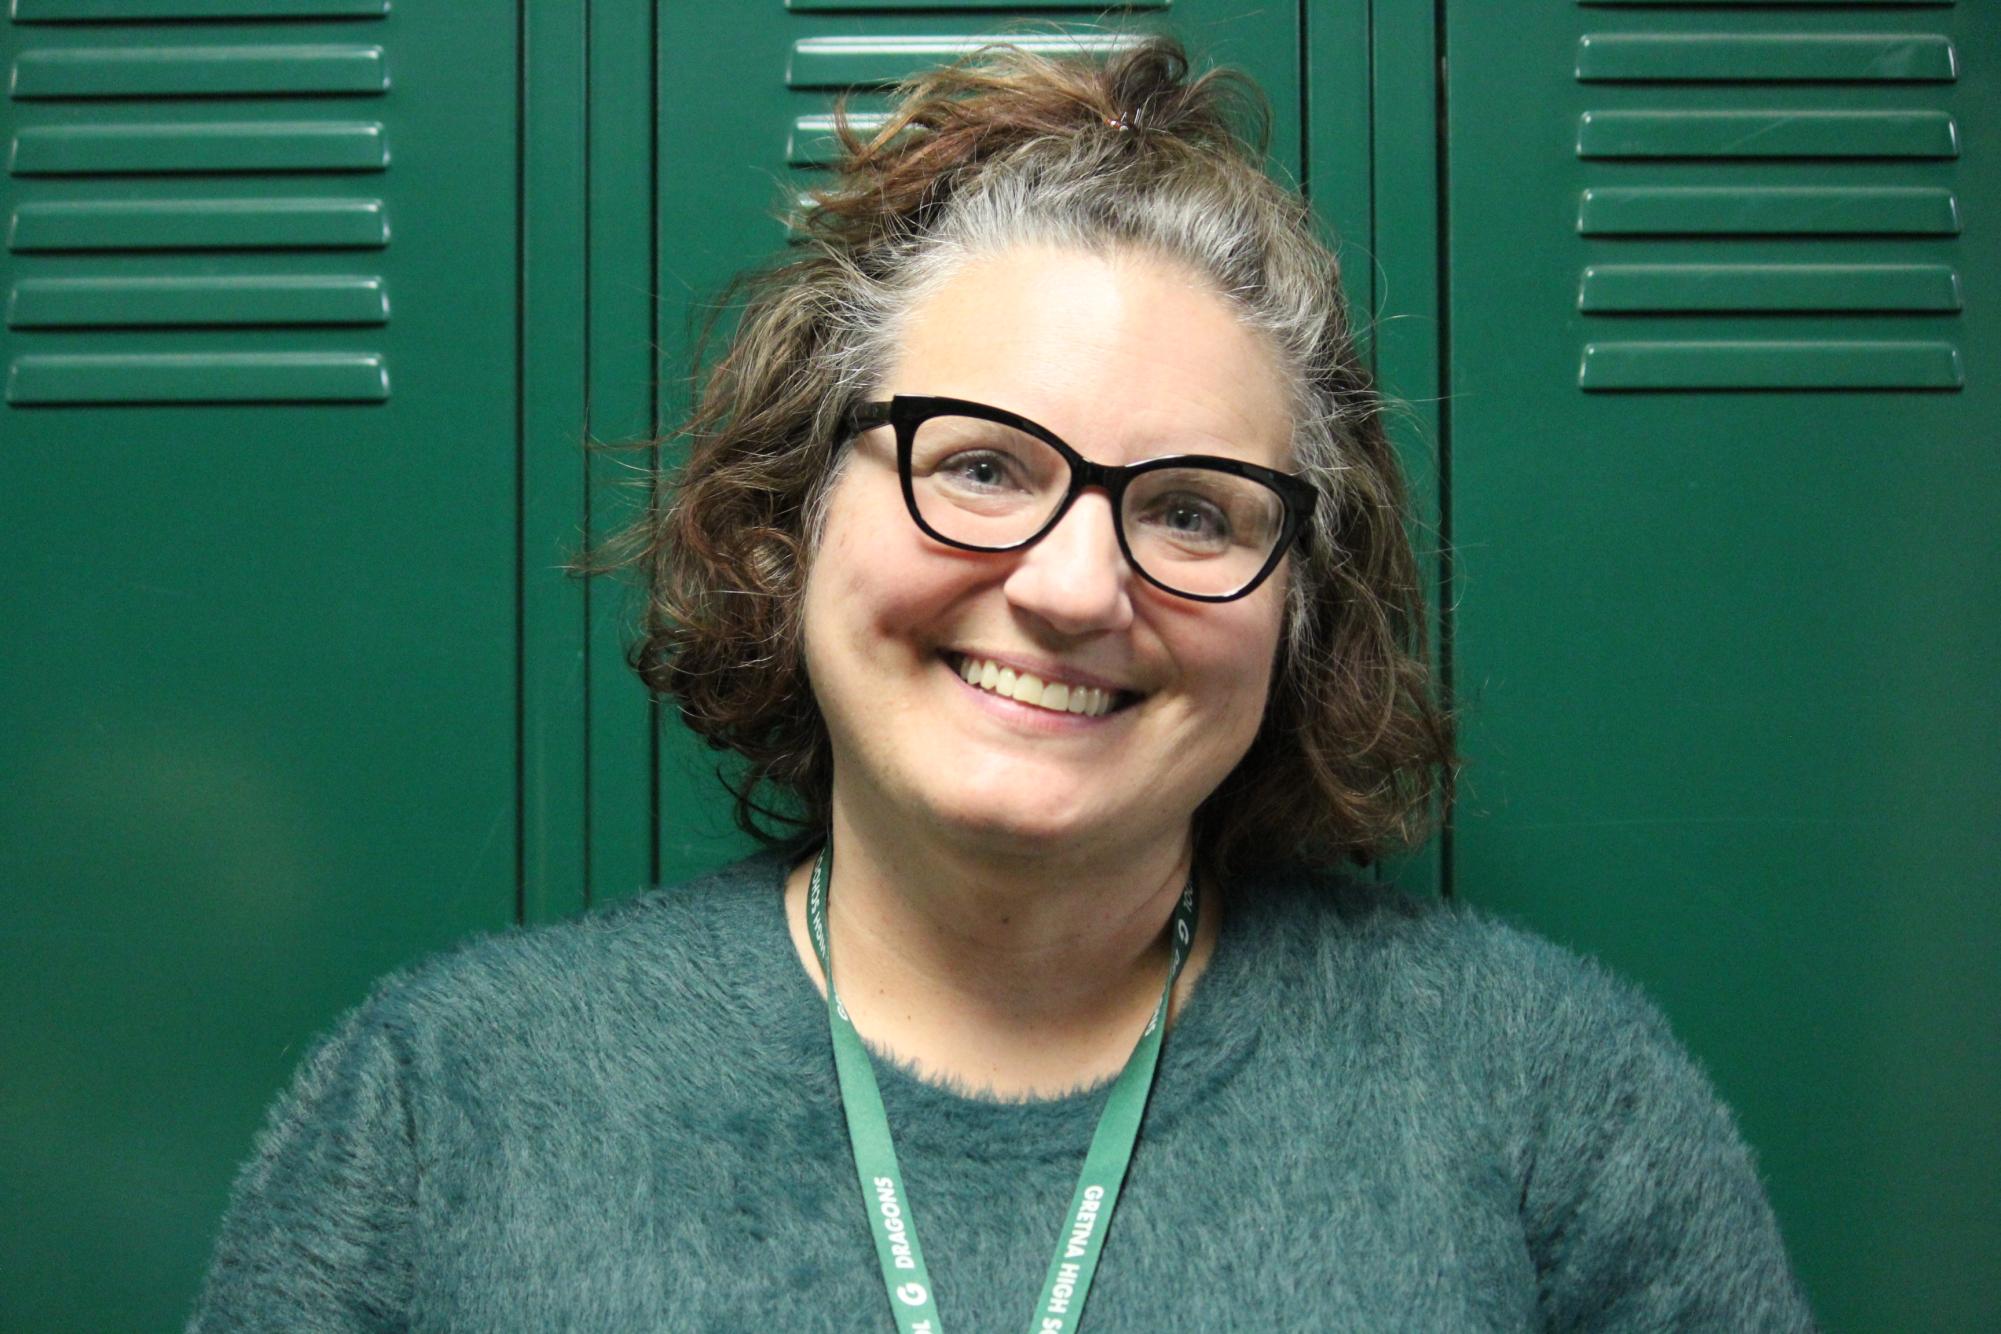 Jennifer Smith has been hired to teach for the rest of the school year. She came to GHS with more than 20 years of education experience. 